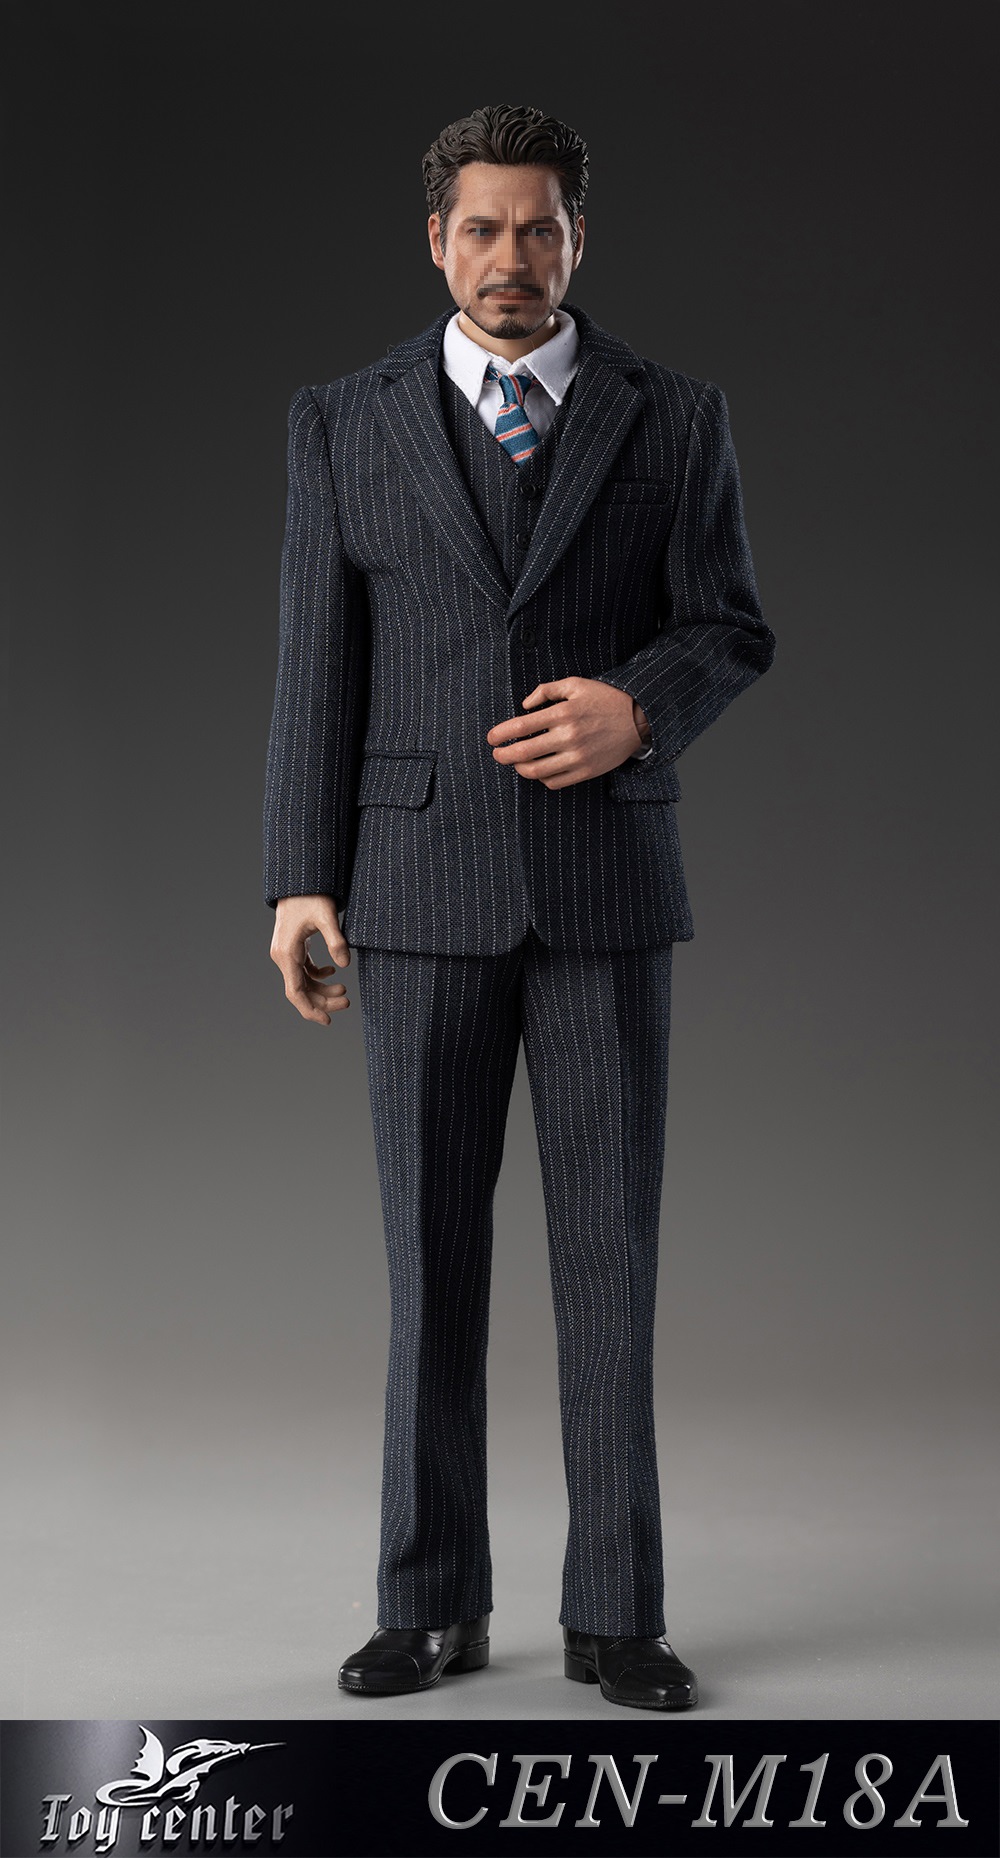 ToyCenter - NEW PRODUCT: Toy center: 1/6 British Gentleman Tony Striped Suit CEN-M18 Three Colors 15522712